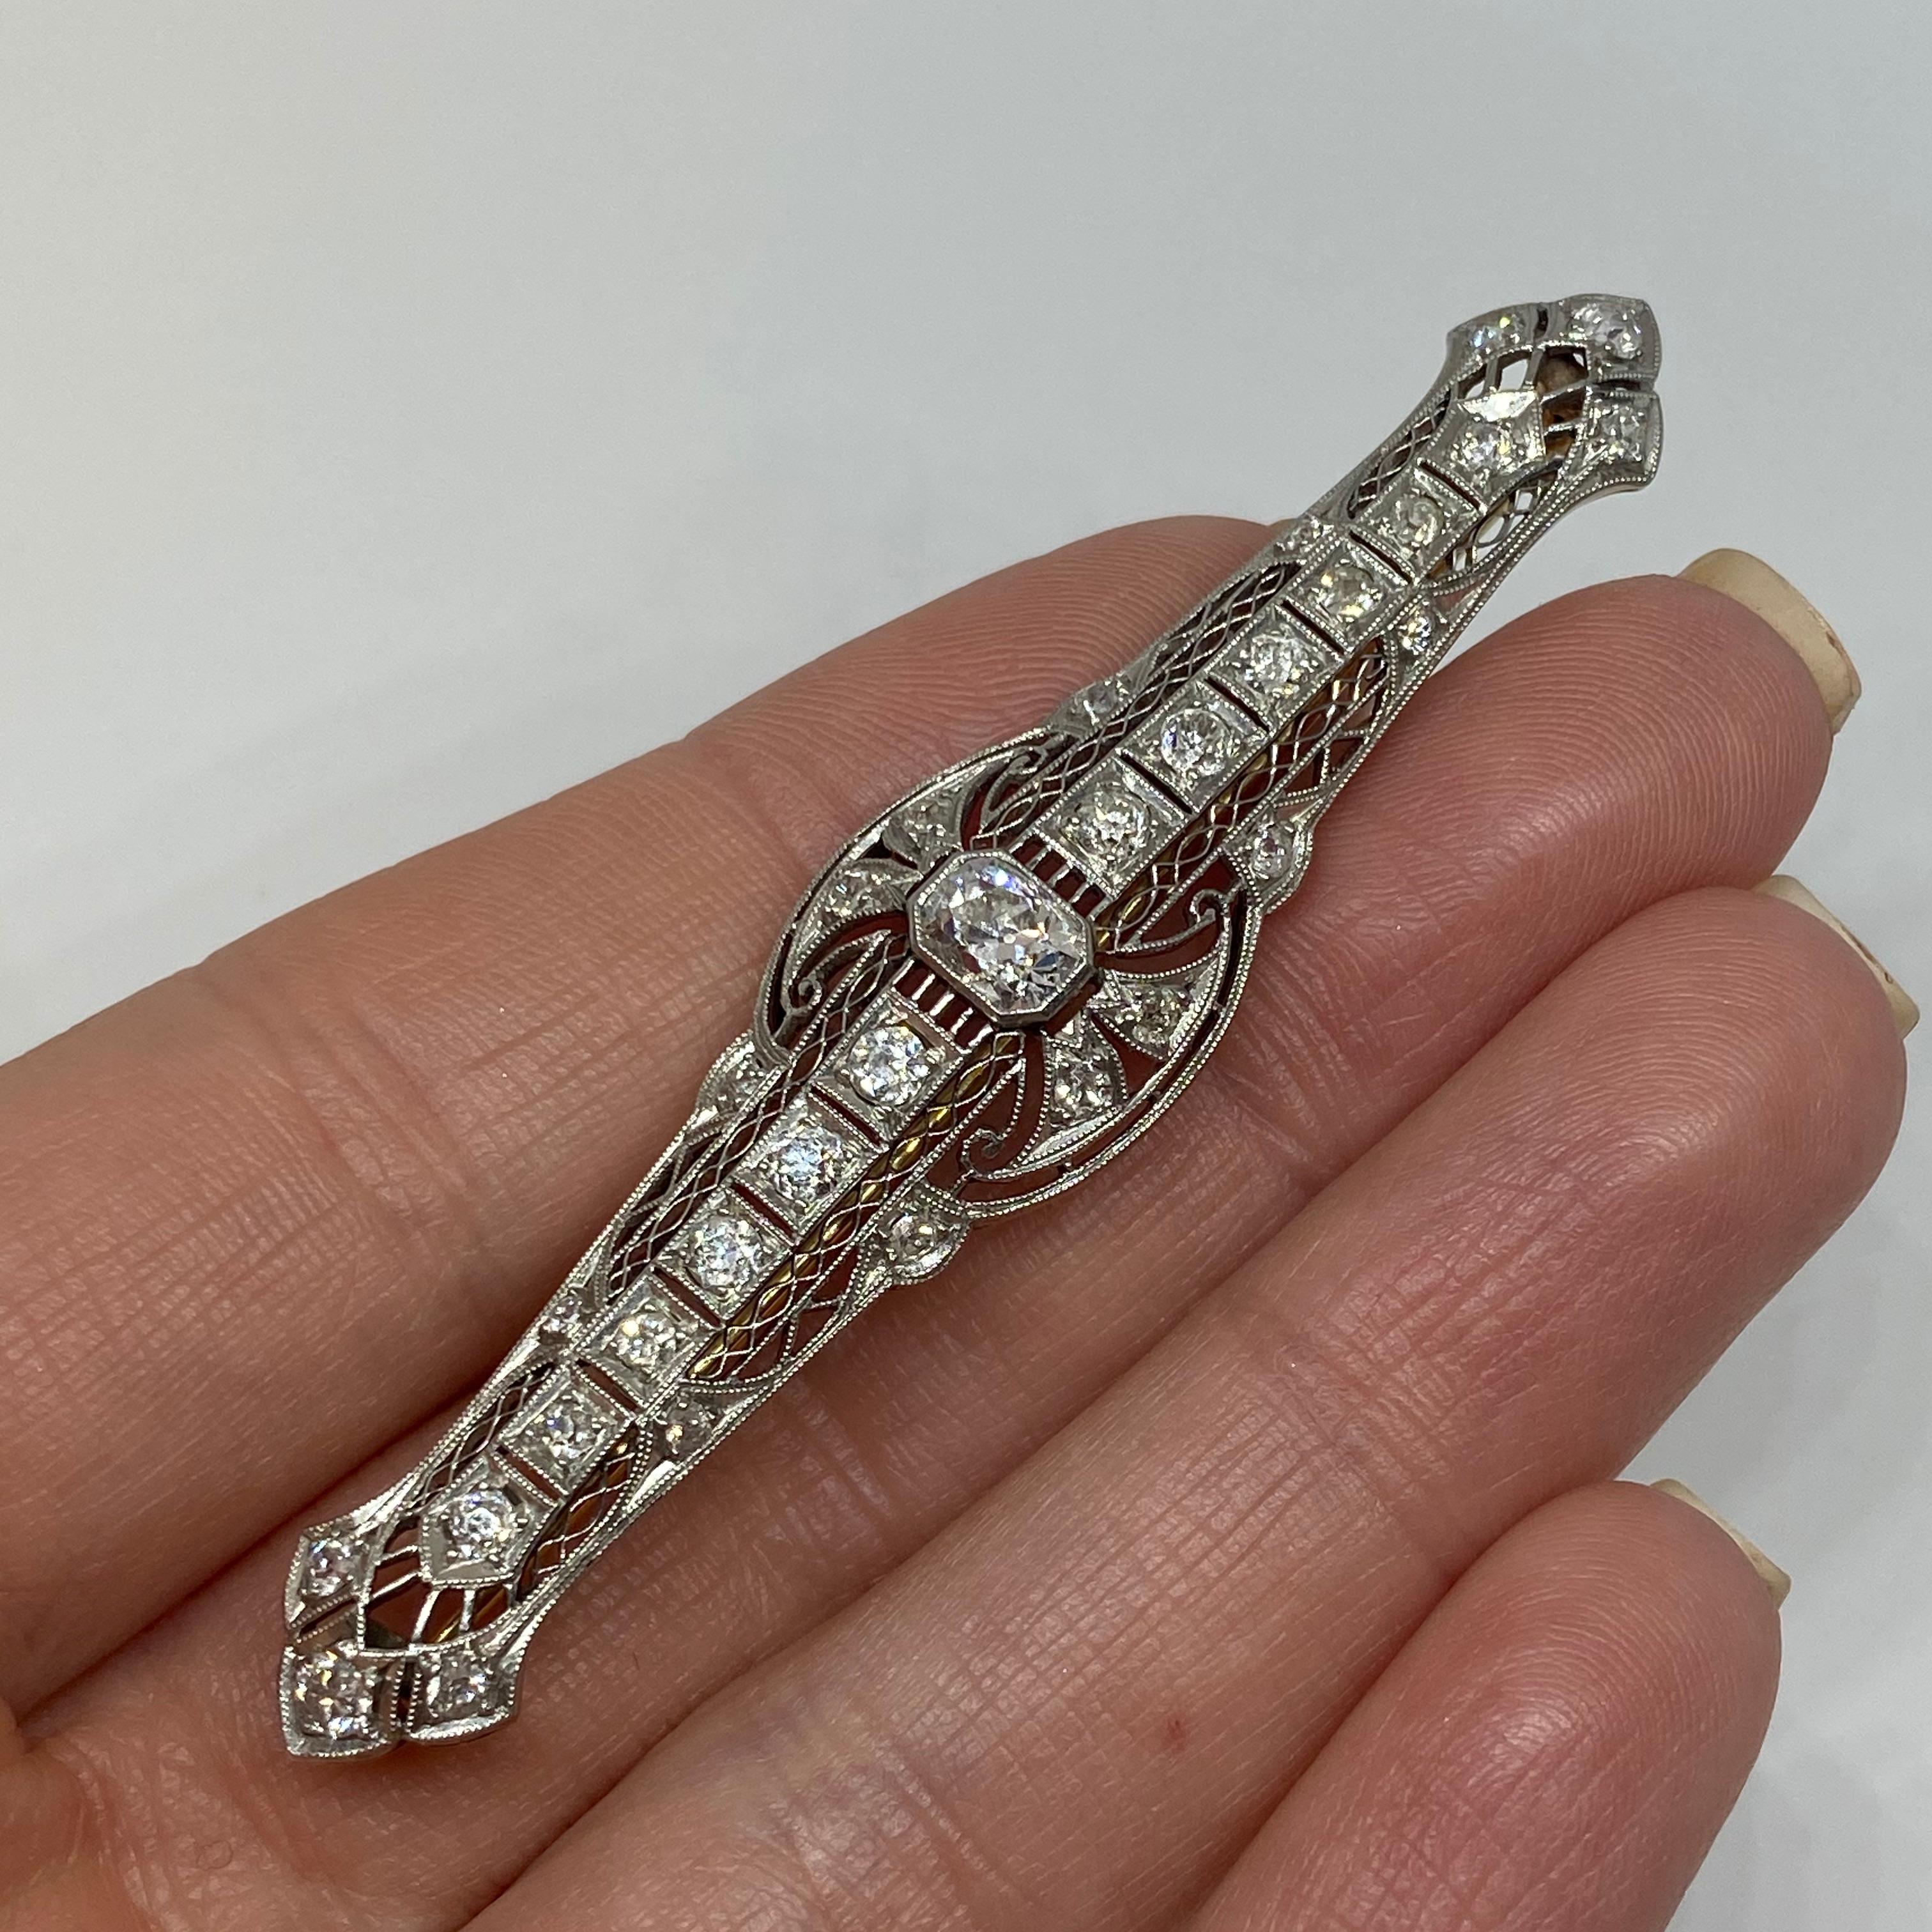 Estate Platinum and 14 Karat Yellow Gold Diamond Brooch 2.57 Carat In Excellent Condition For Sale In Carmel-by-the-Sea, CA